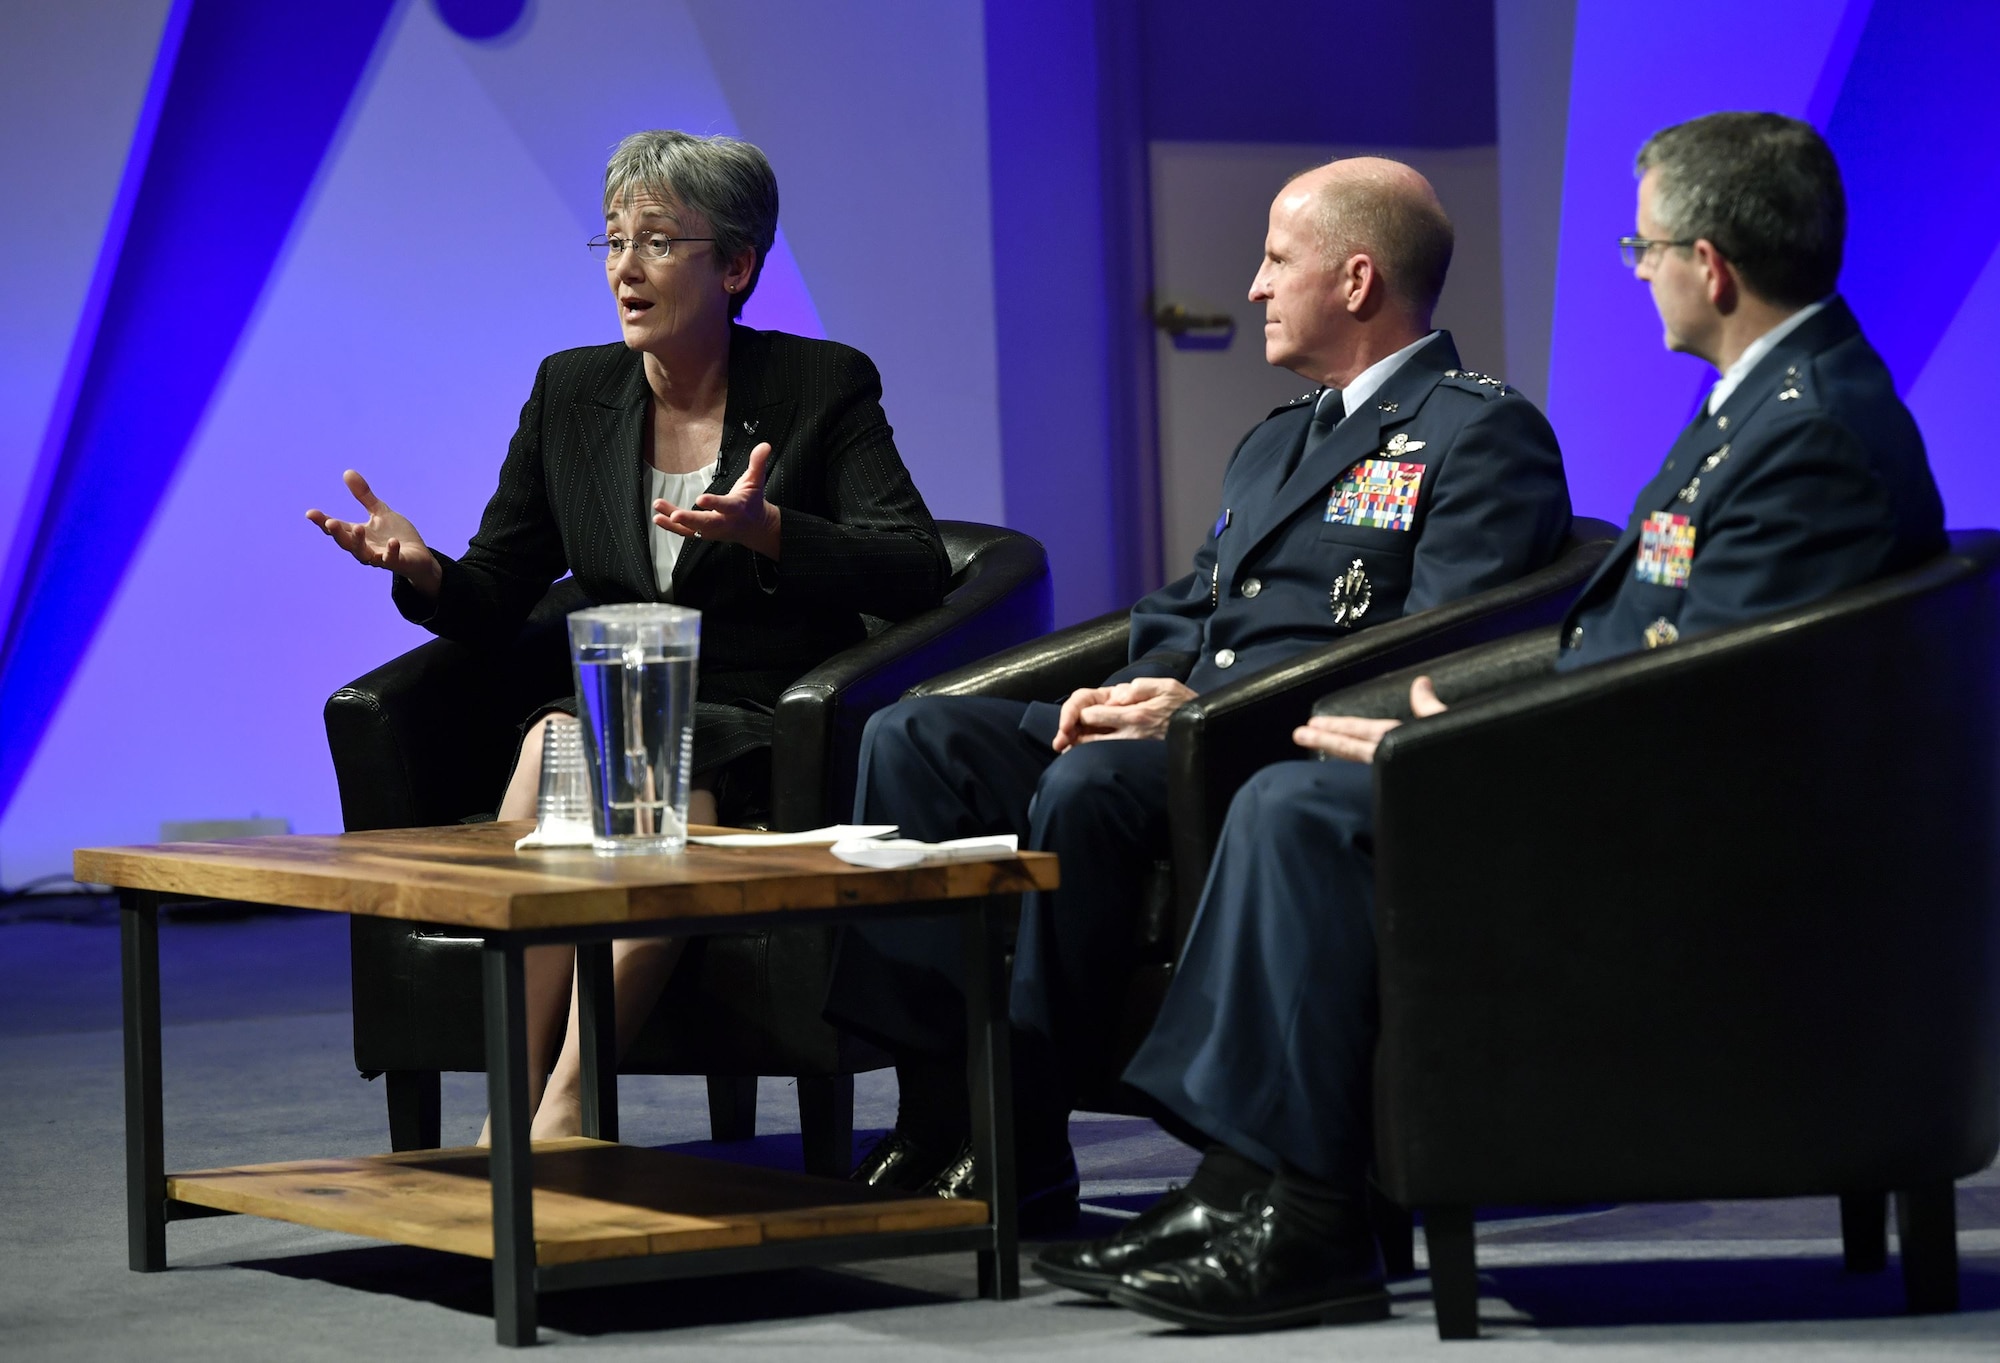 Secretary of the Air Force Heather Wilson takes questions while sharing the panel with Vice Chief of Staff of the Air Force Gen. Stephen Wilson and Air Force Research Laboratory commander Major Gen. William Cooley at the National Academy of Sciences, Washington, D.C., Jan. 18, 2018. Wilson highlighted the importance of working with universities and private industry to advance tomorrow’s Air Force. (U.S. Air Force photo by Wayne A. Clark)